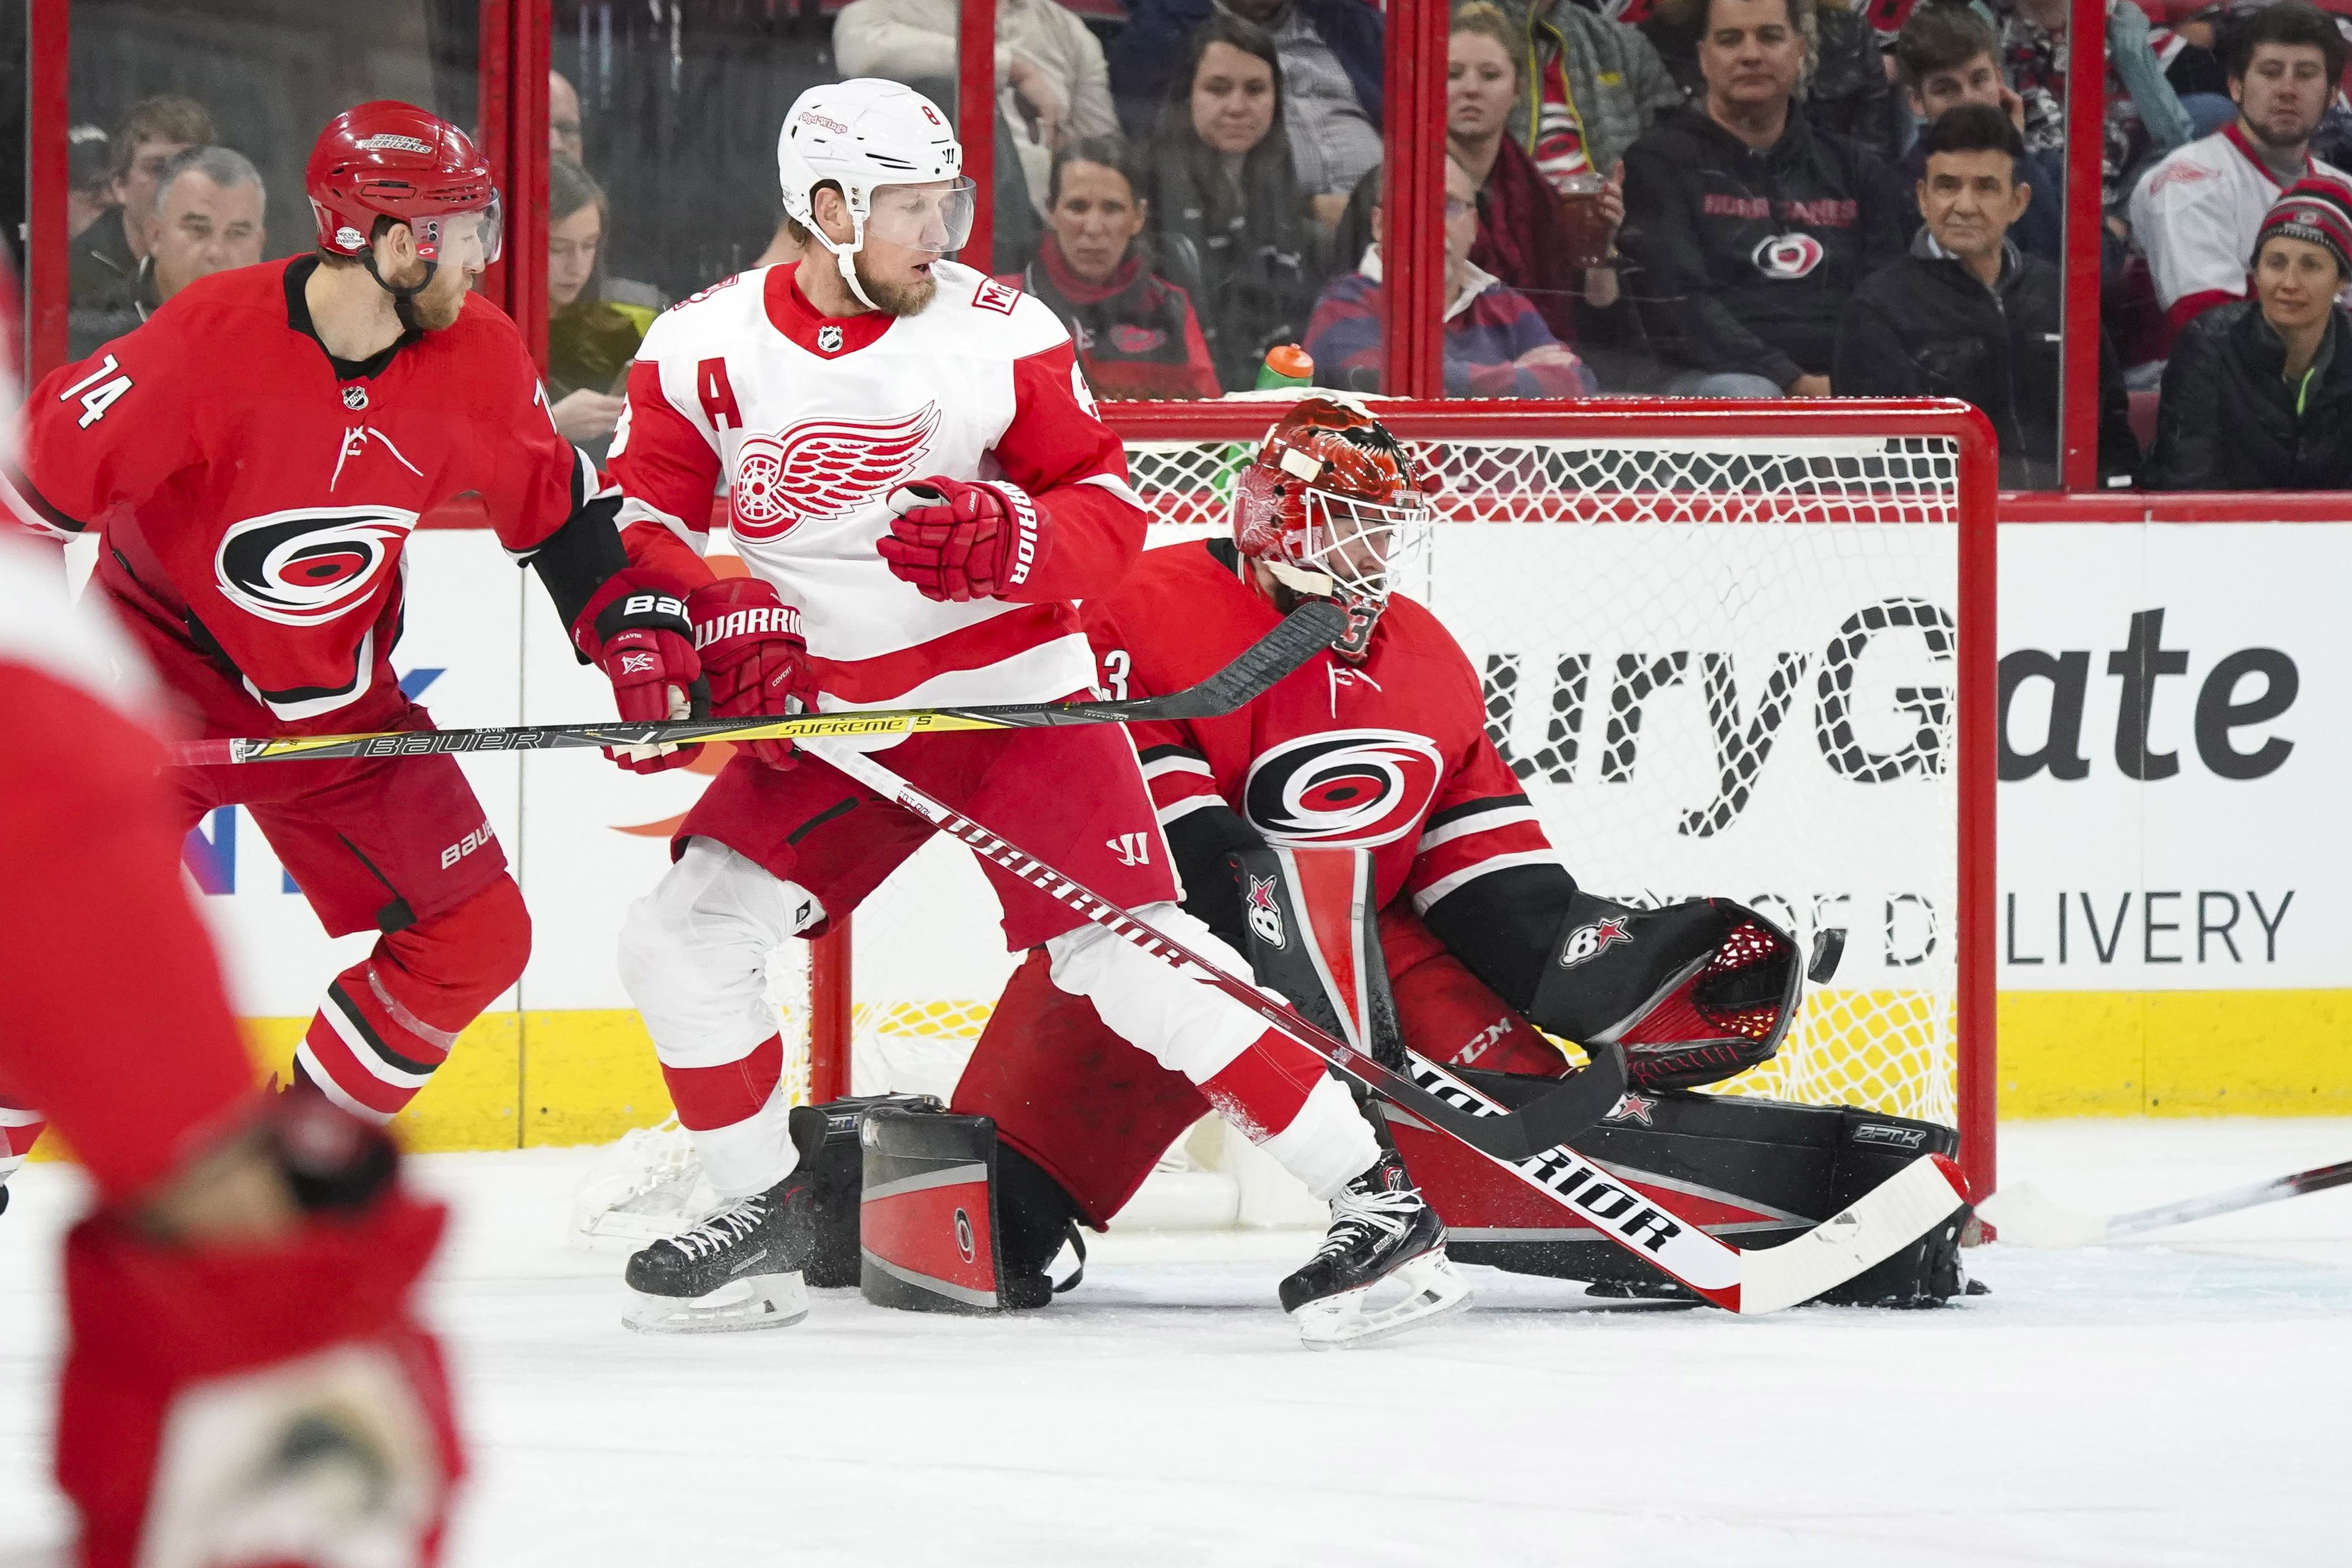 Detroit Red Wings can't muster offense in shutout loss to Hurricanes